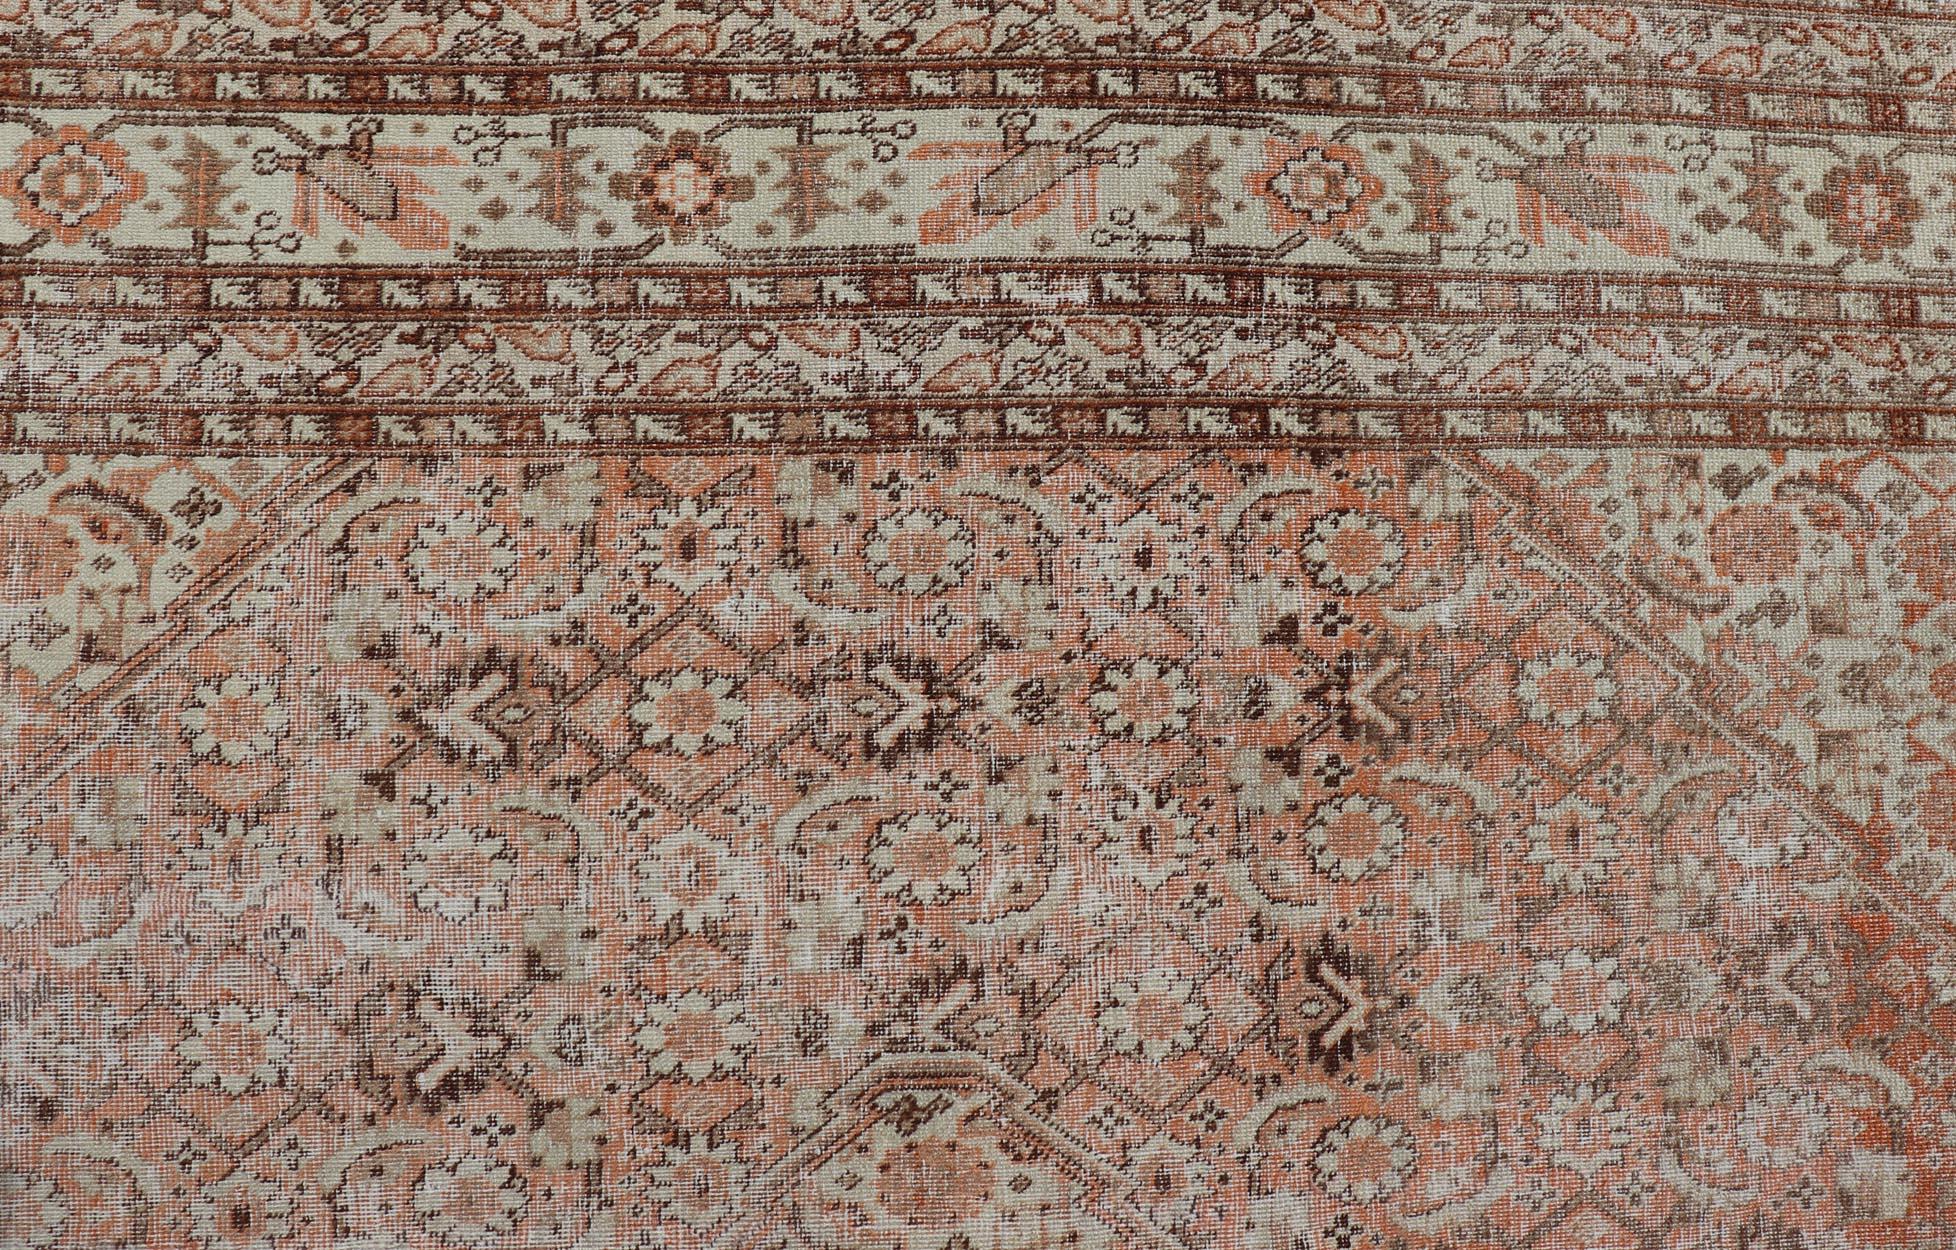 This antique Persian Tabriz rug features an all-over, sub-geometric floral design rendered in off white, orange and brown tones. A complementary, multi-tiered border encompasses the entirety of the piece; making it a marvelous fit for a wide variety